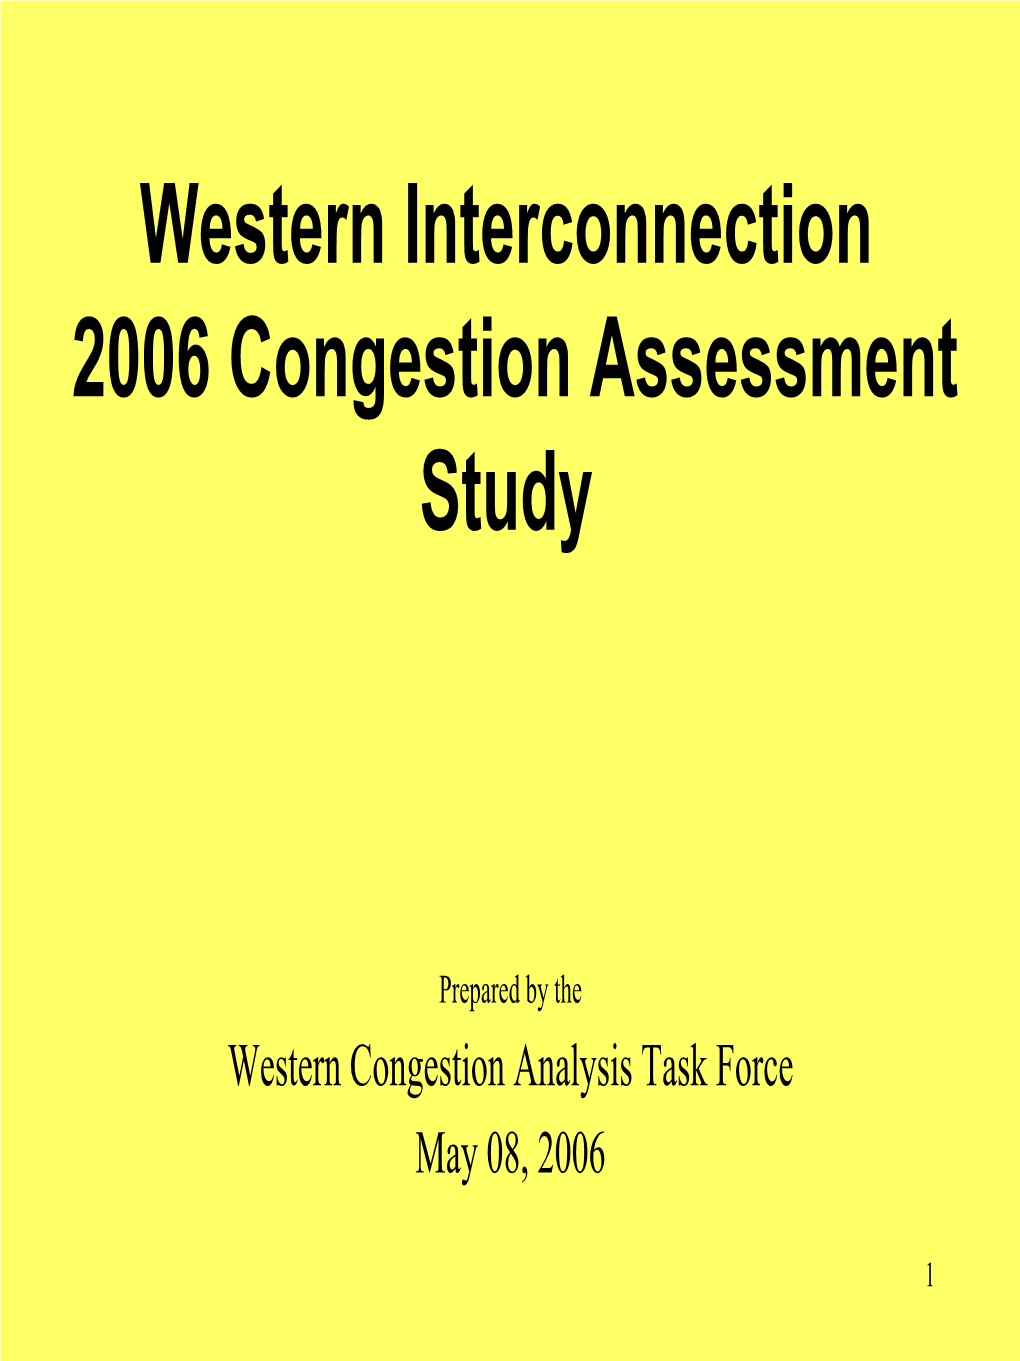 Western Interconnection 2006 Congestion Assessment Study